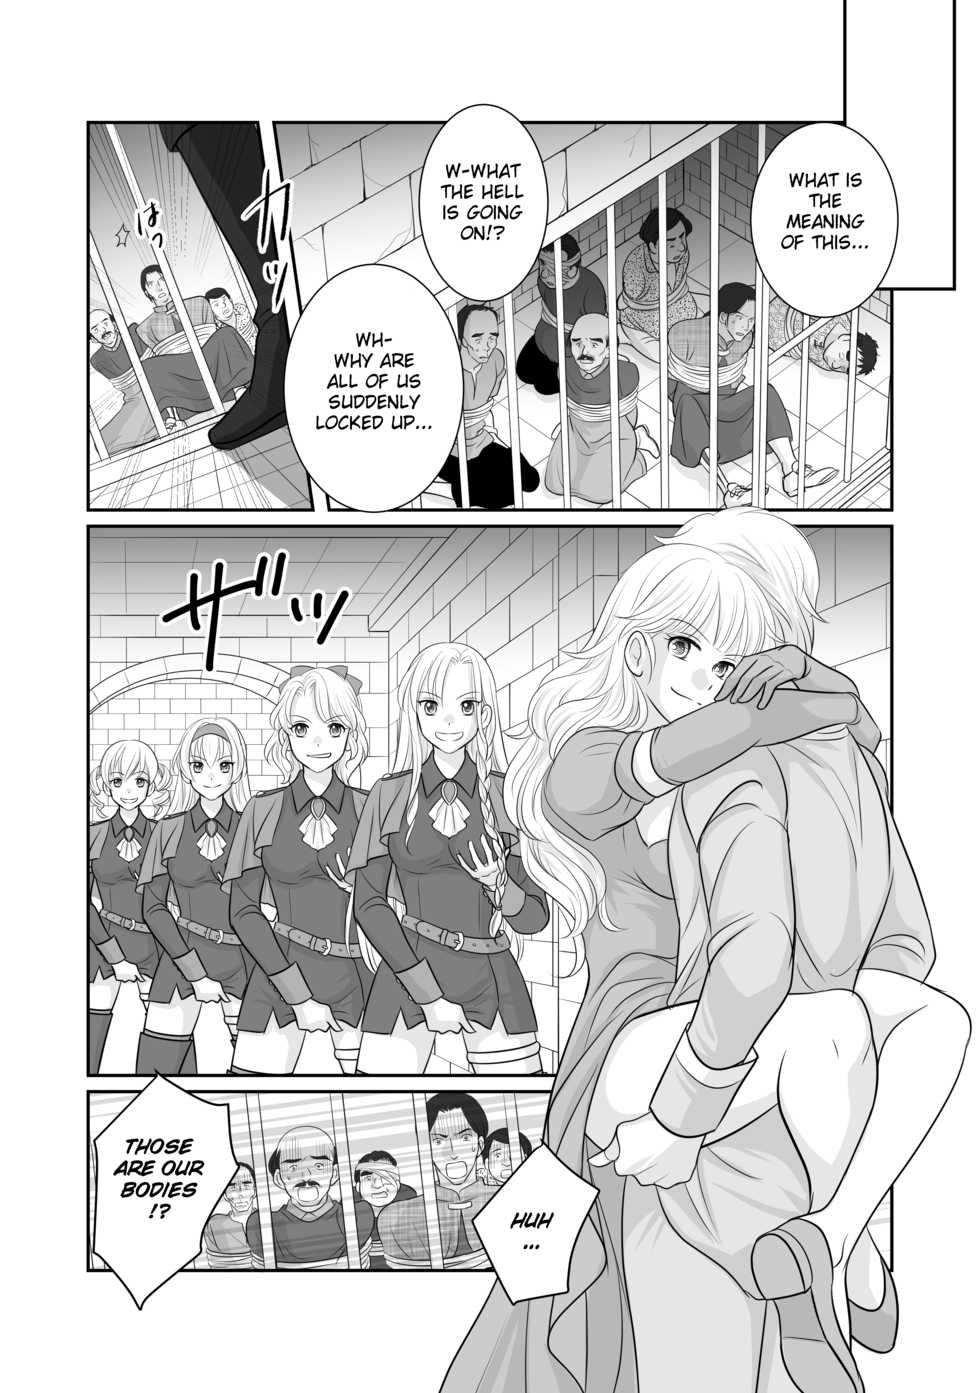 Page 21 - [r-groop] Misogyny Conquest Chapter 3 (English) — akuma.moe